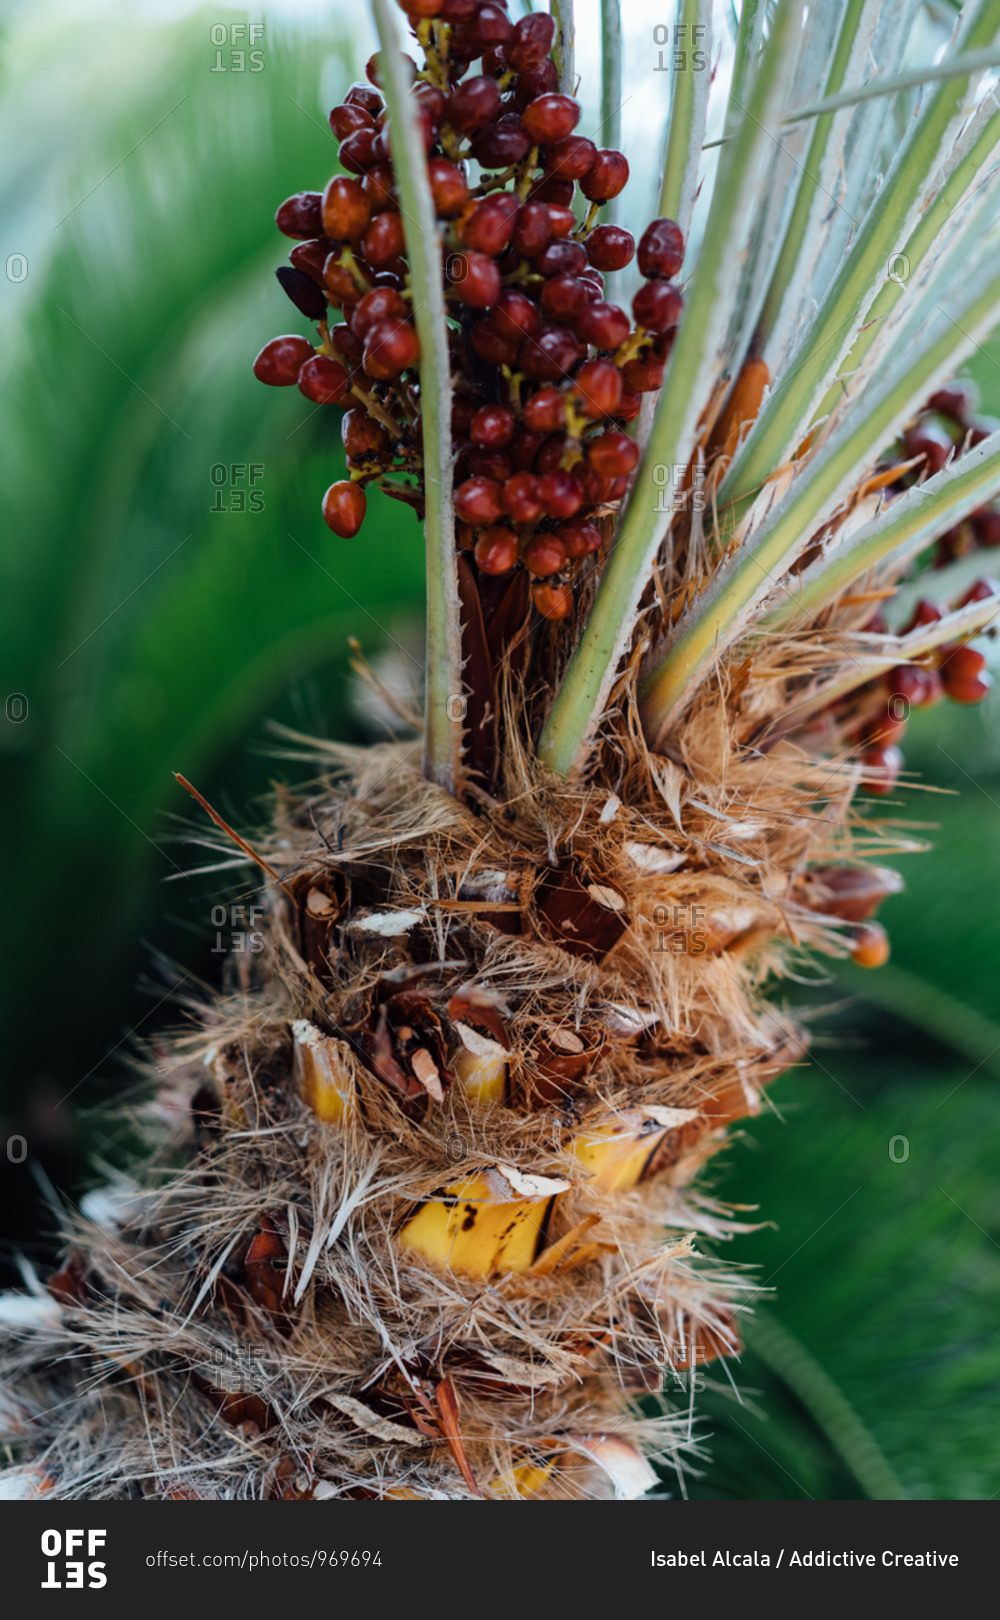 Uneven spike peach palm trunk with tall stems and bunch of small red berries behind fern leaves in afternoon